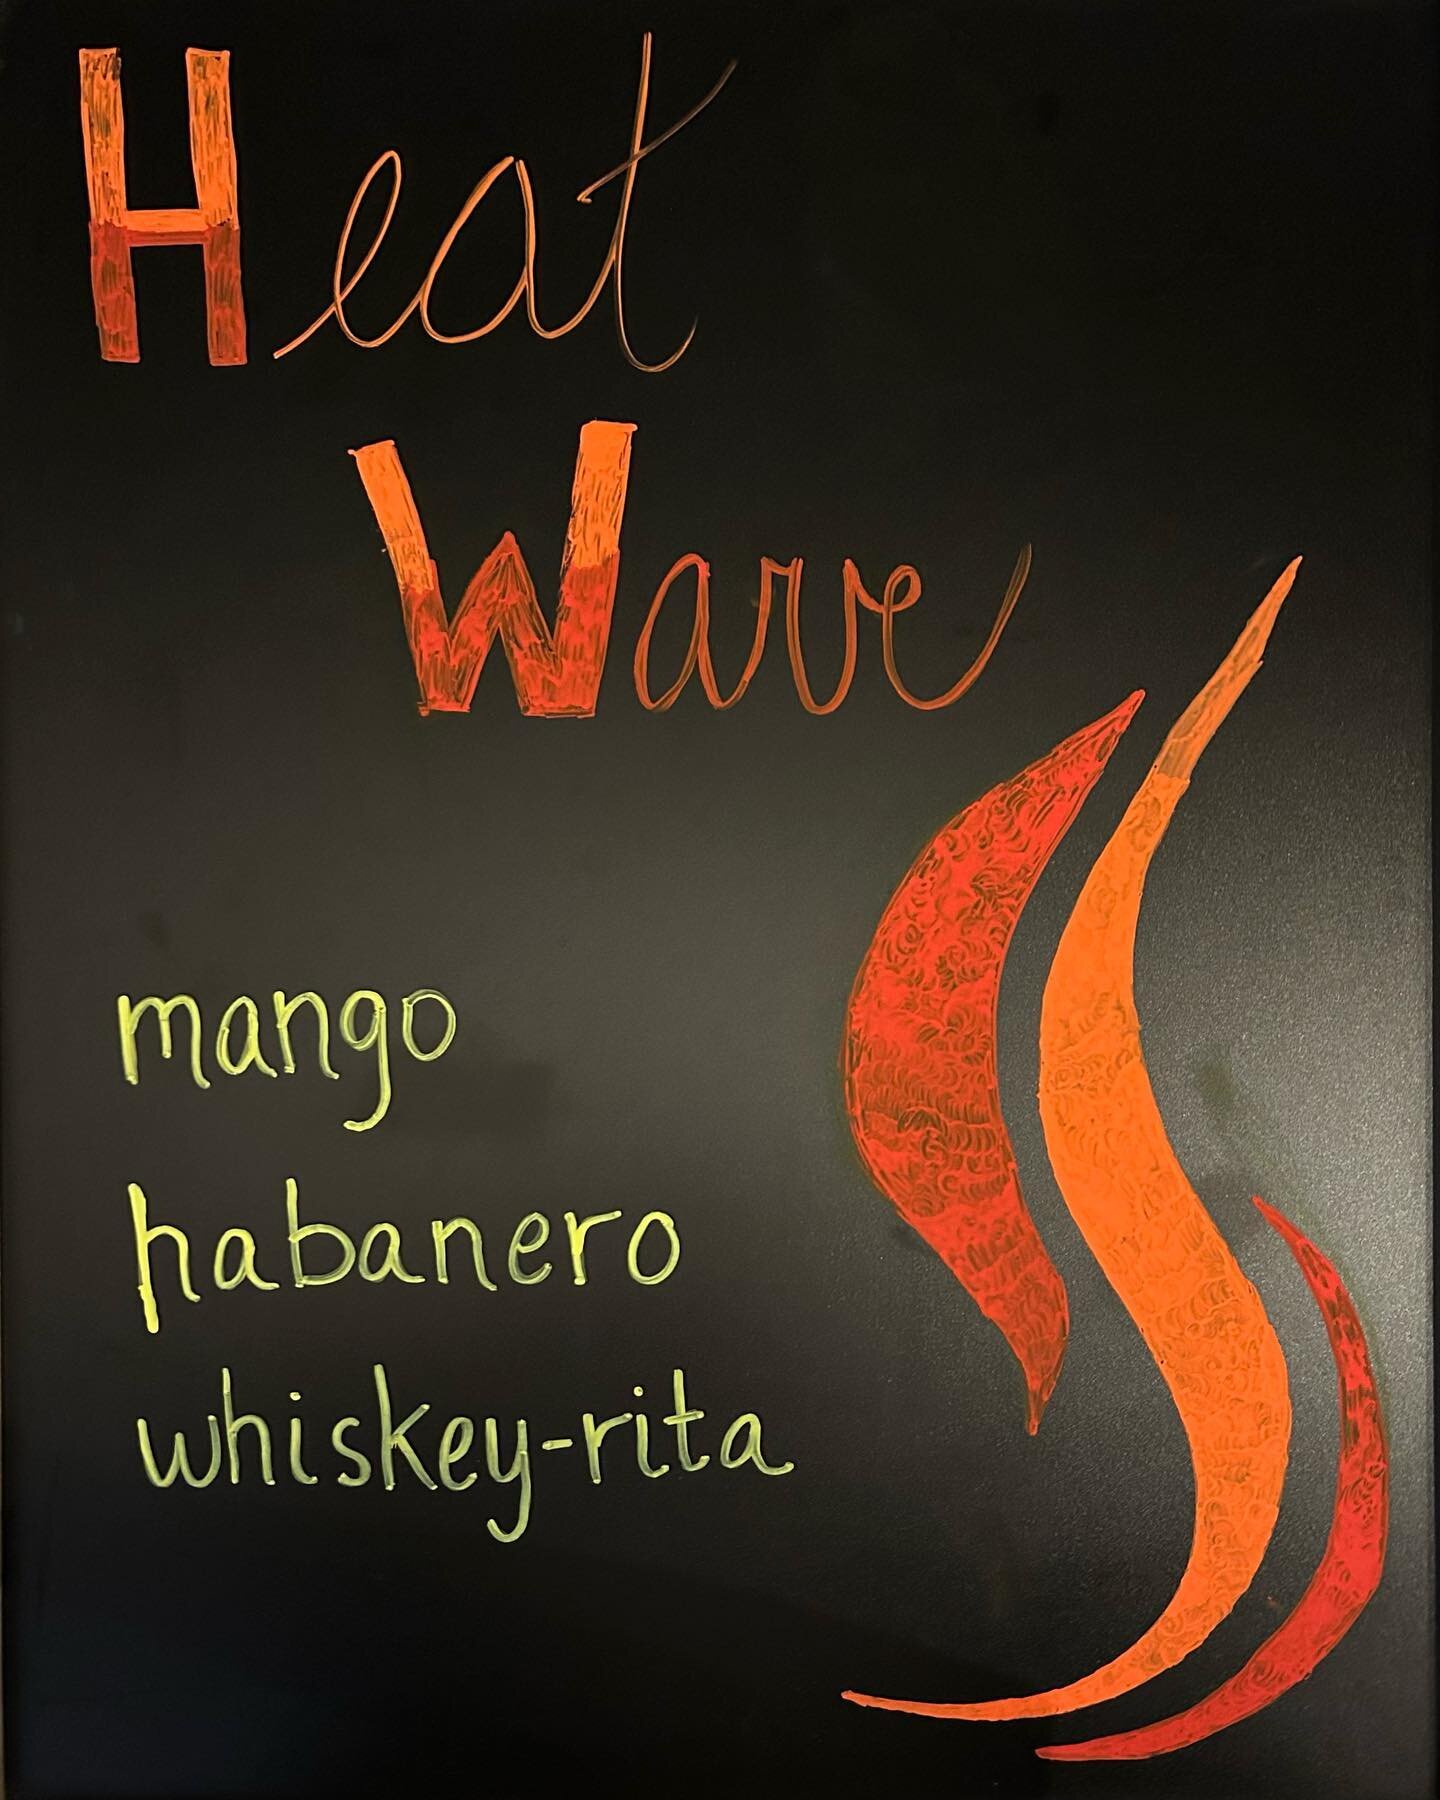 The &ldquo;Heat Wave&rdquo; is here! Come out and try nacho average margarita with this mango-habanero infused whiskey!